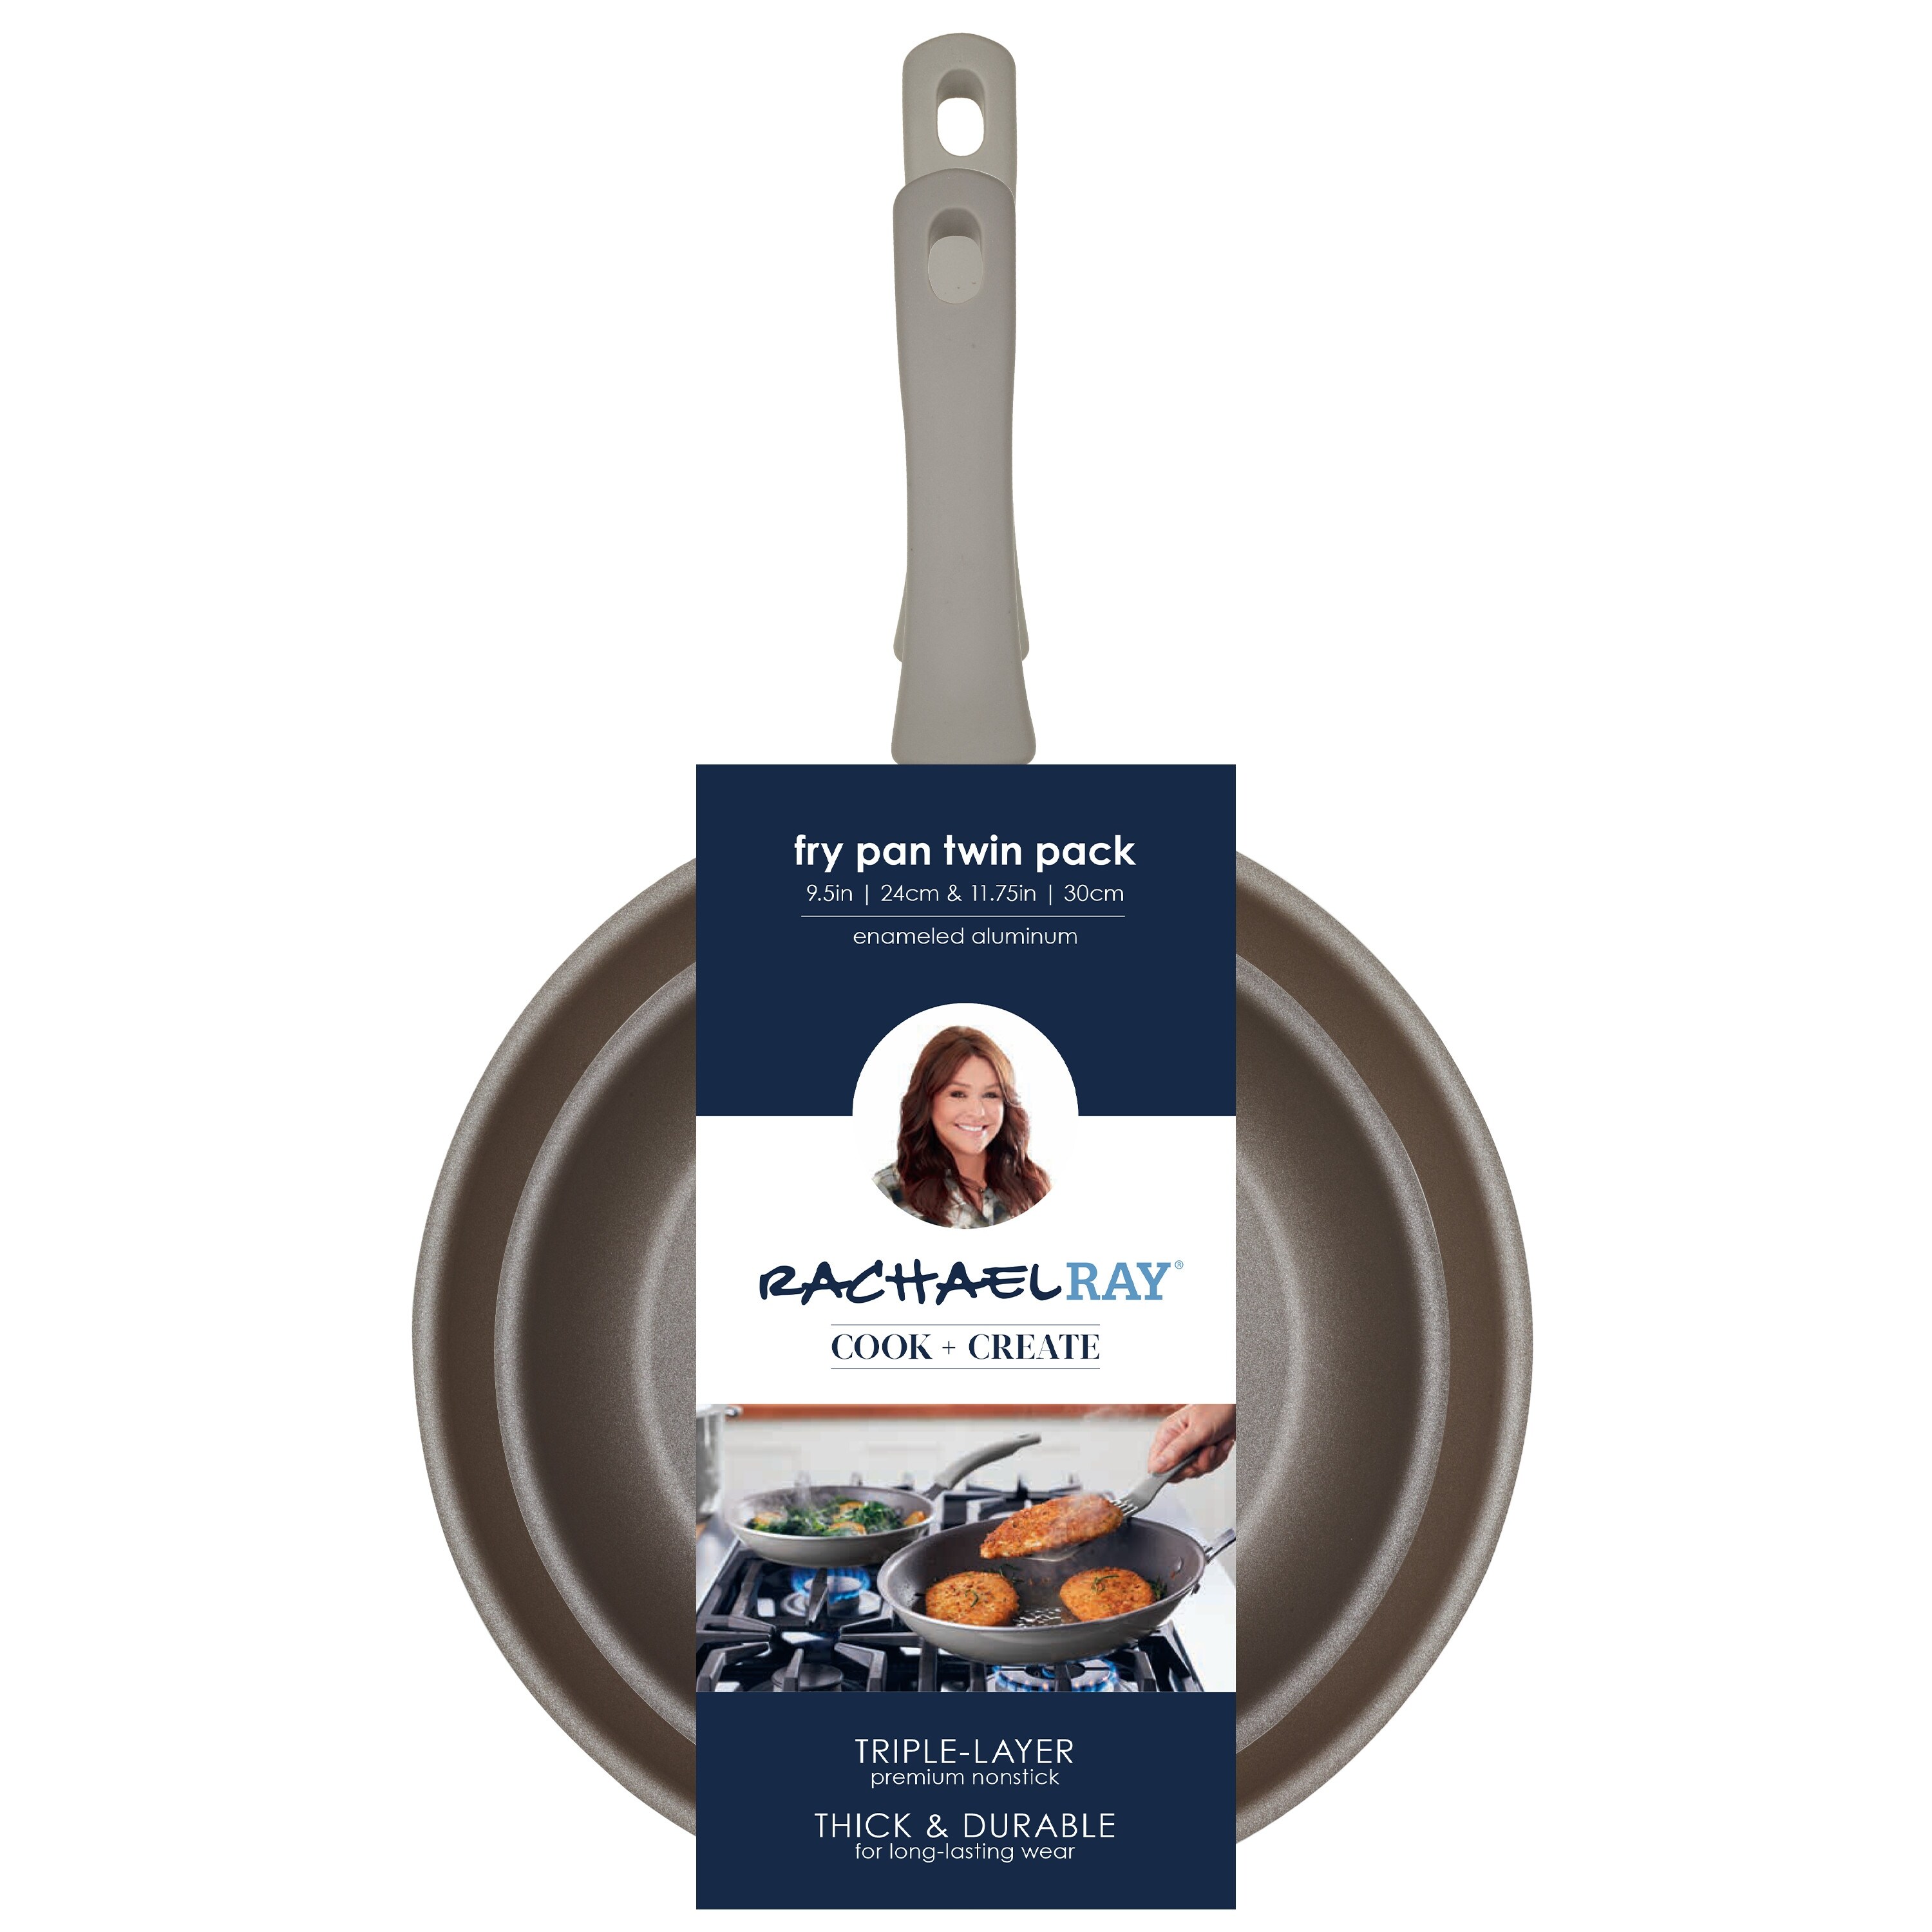 https://ak1.ostkcdn.com/images/products/is/images/direct/4b4b2a34445f320f3aad2b93cd416eb6f9f0616c/Rachael-Ray-Cook-%2B-Create-Aluminum-Nonstick-Frying-Pan-Set%2C-2-Piece%2C-Agave-Blue.jpg